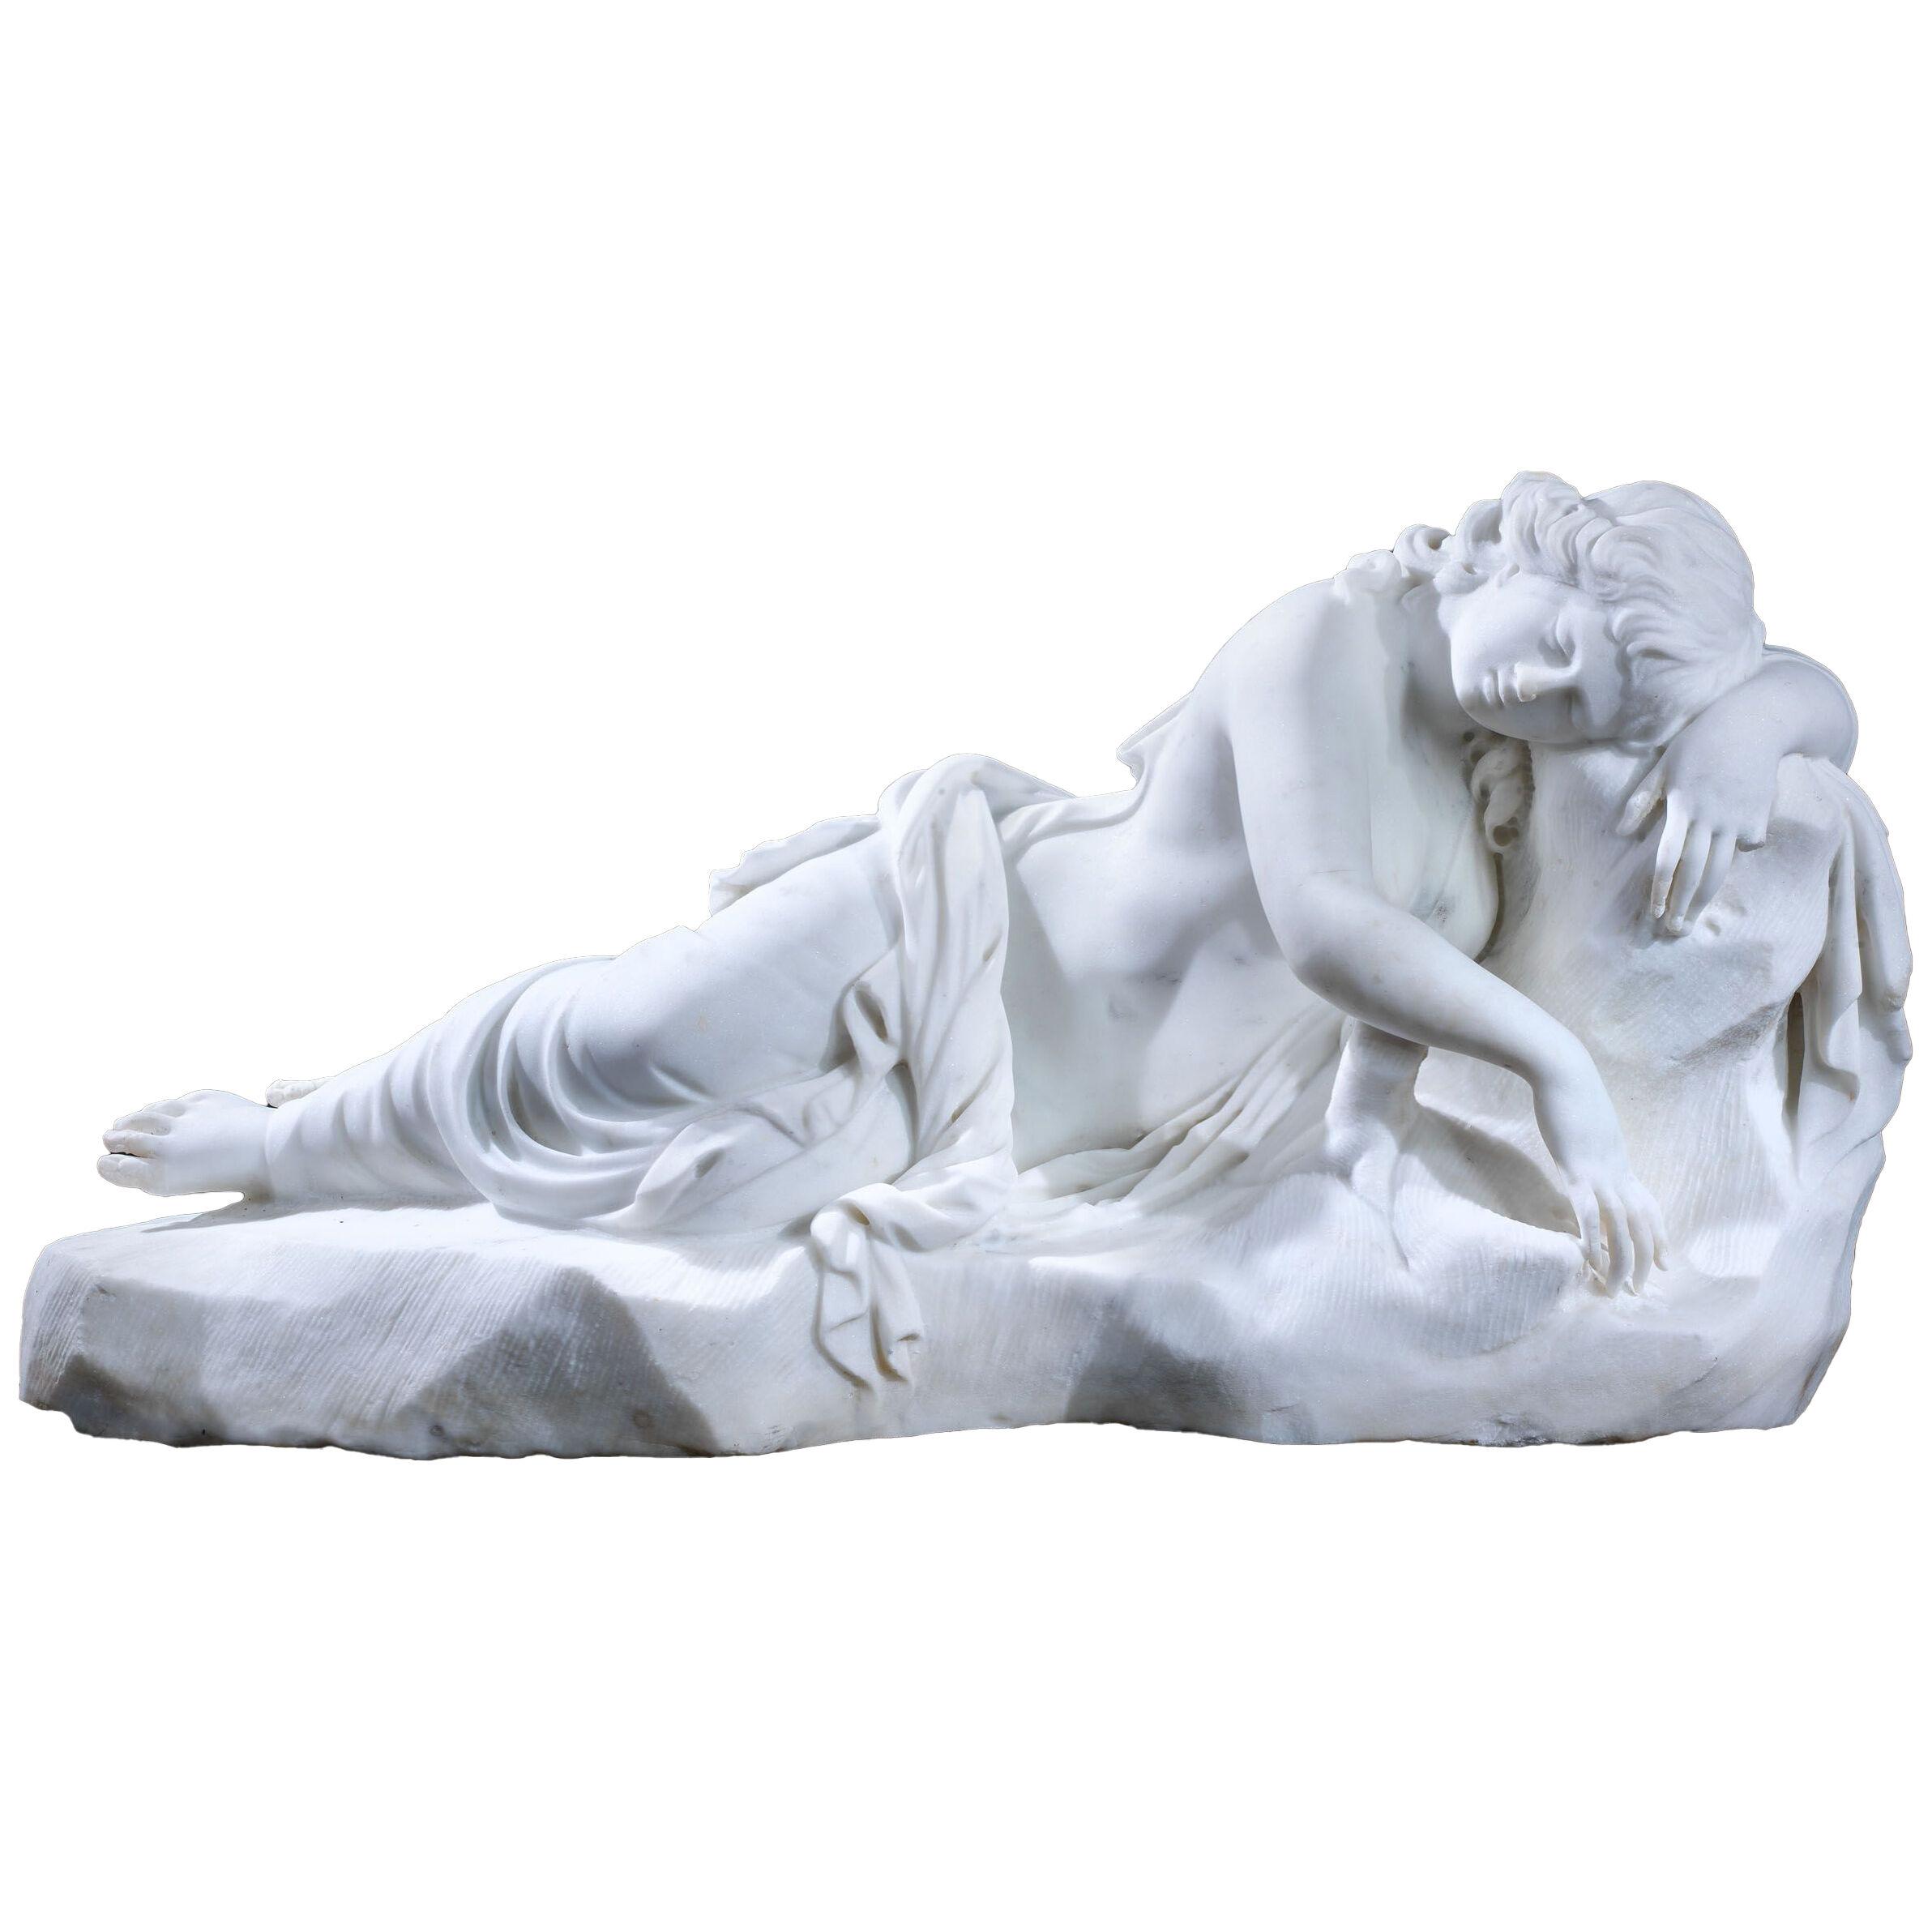 Large Italian Statue of a Sleeping Nymph